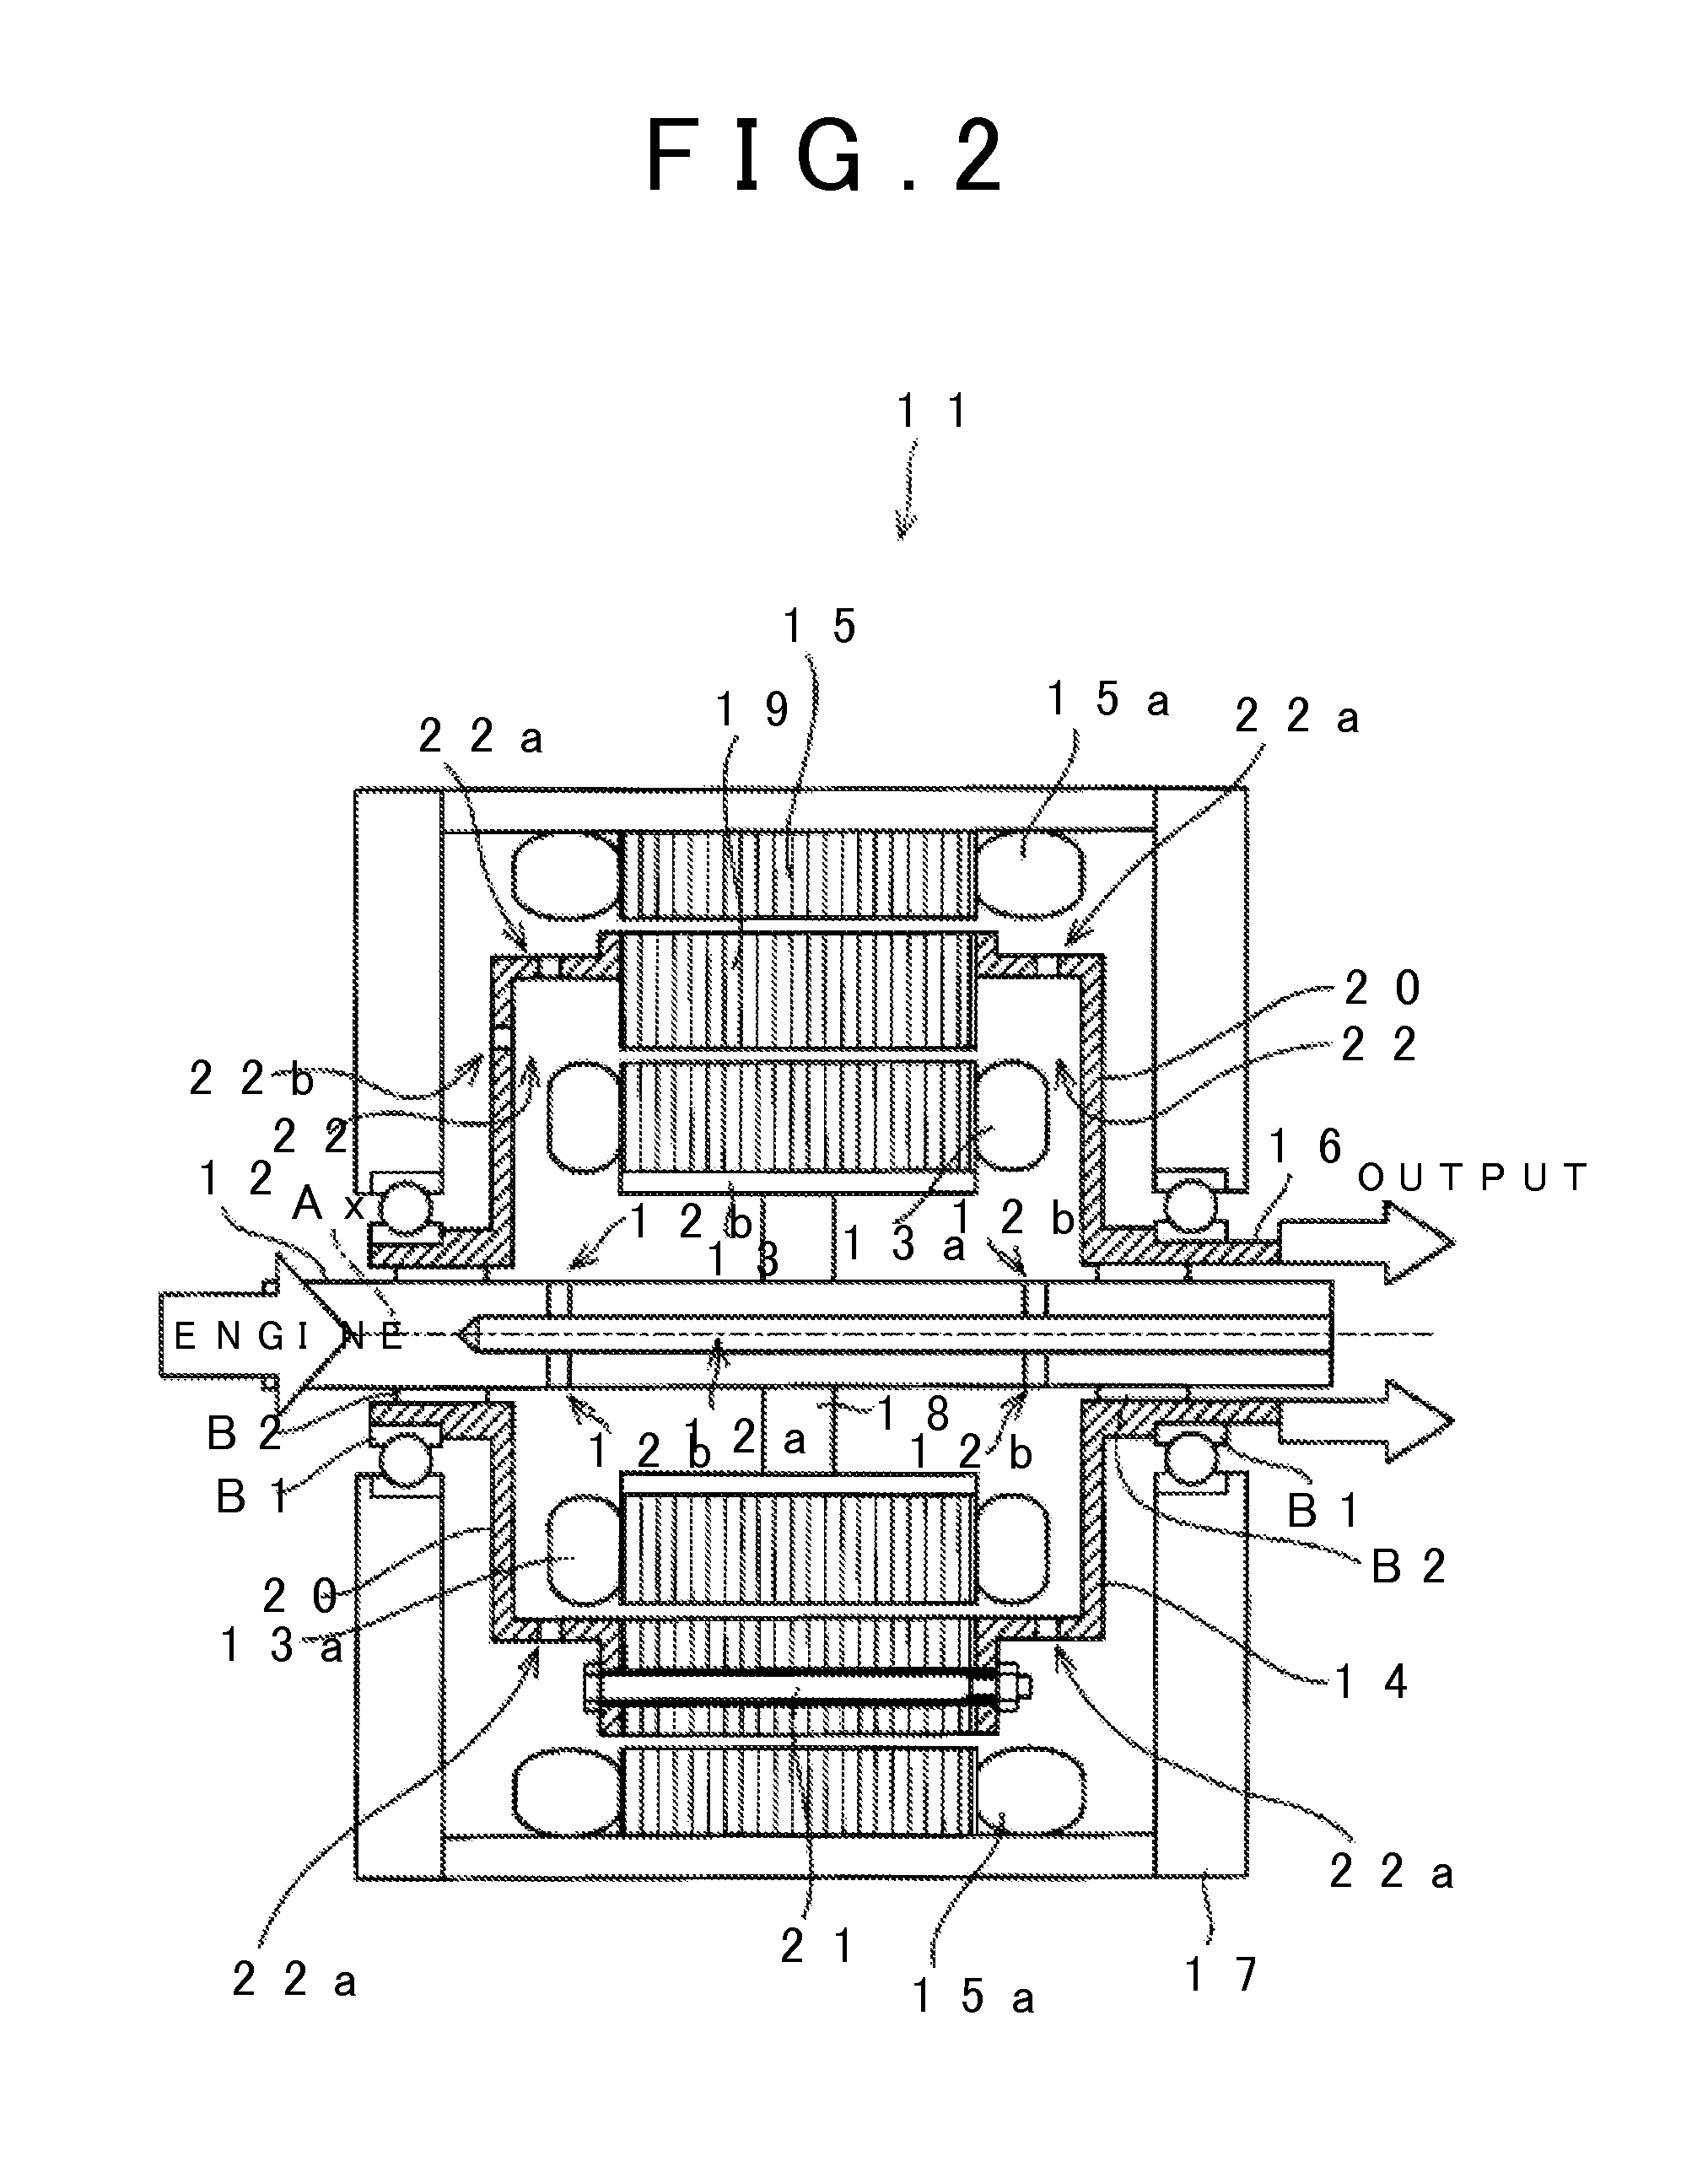 Power generation control apparatus for hybrid vehicle